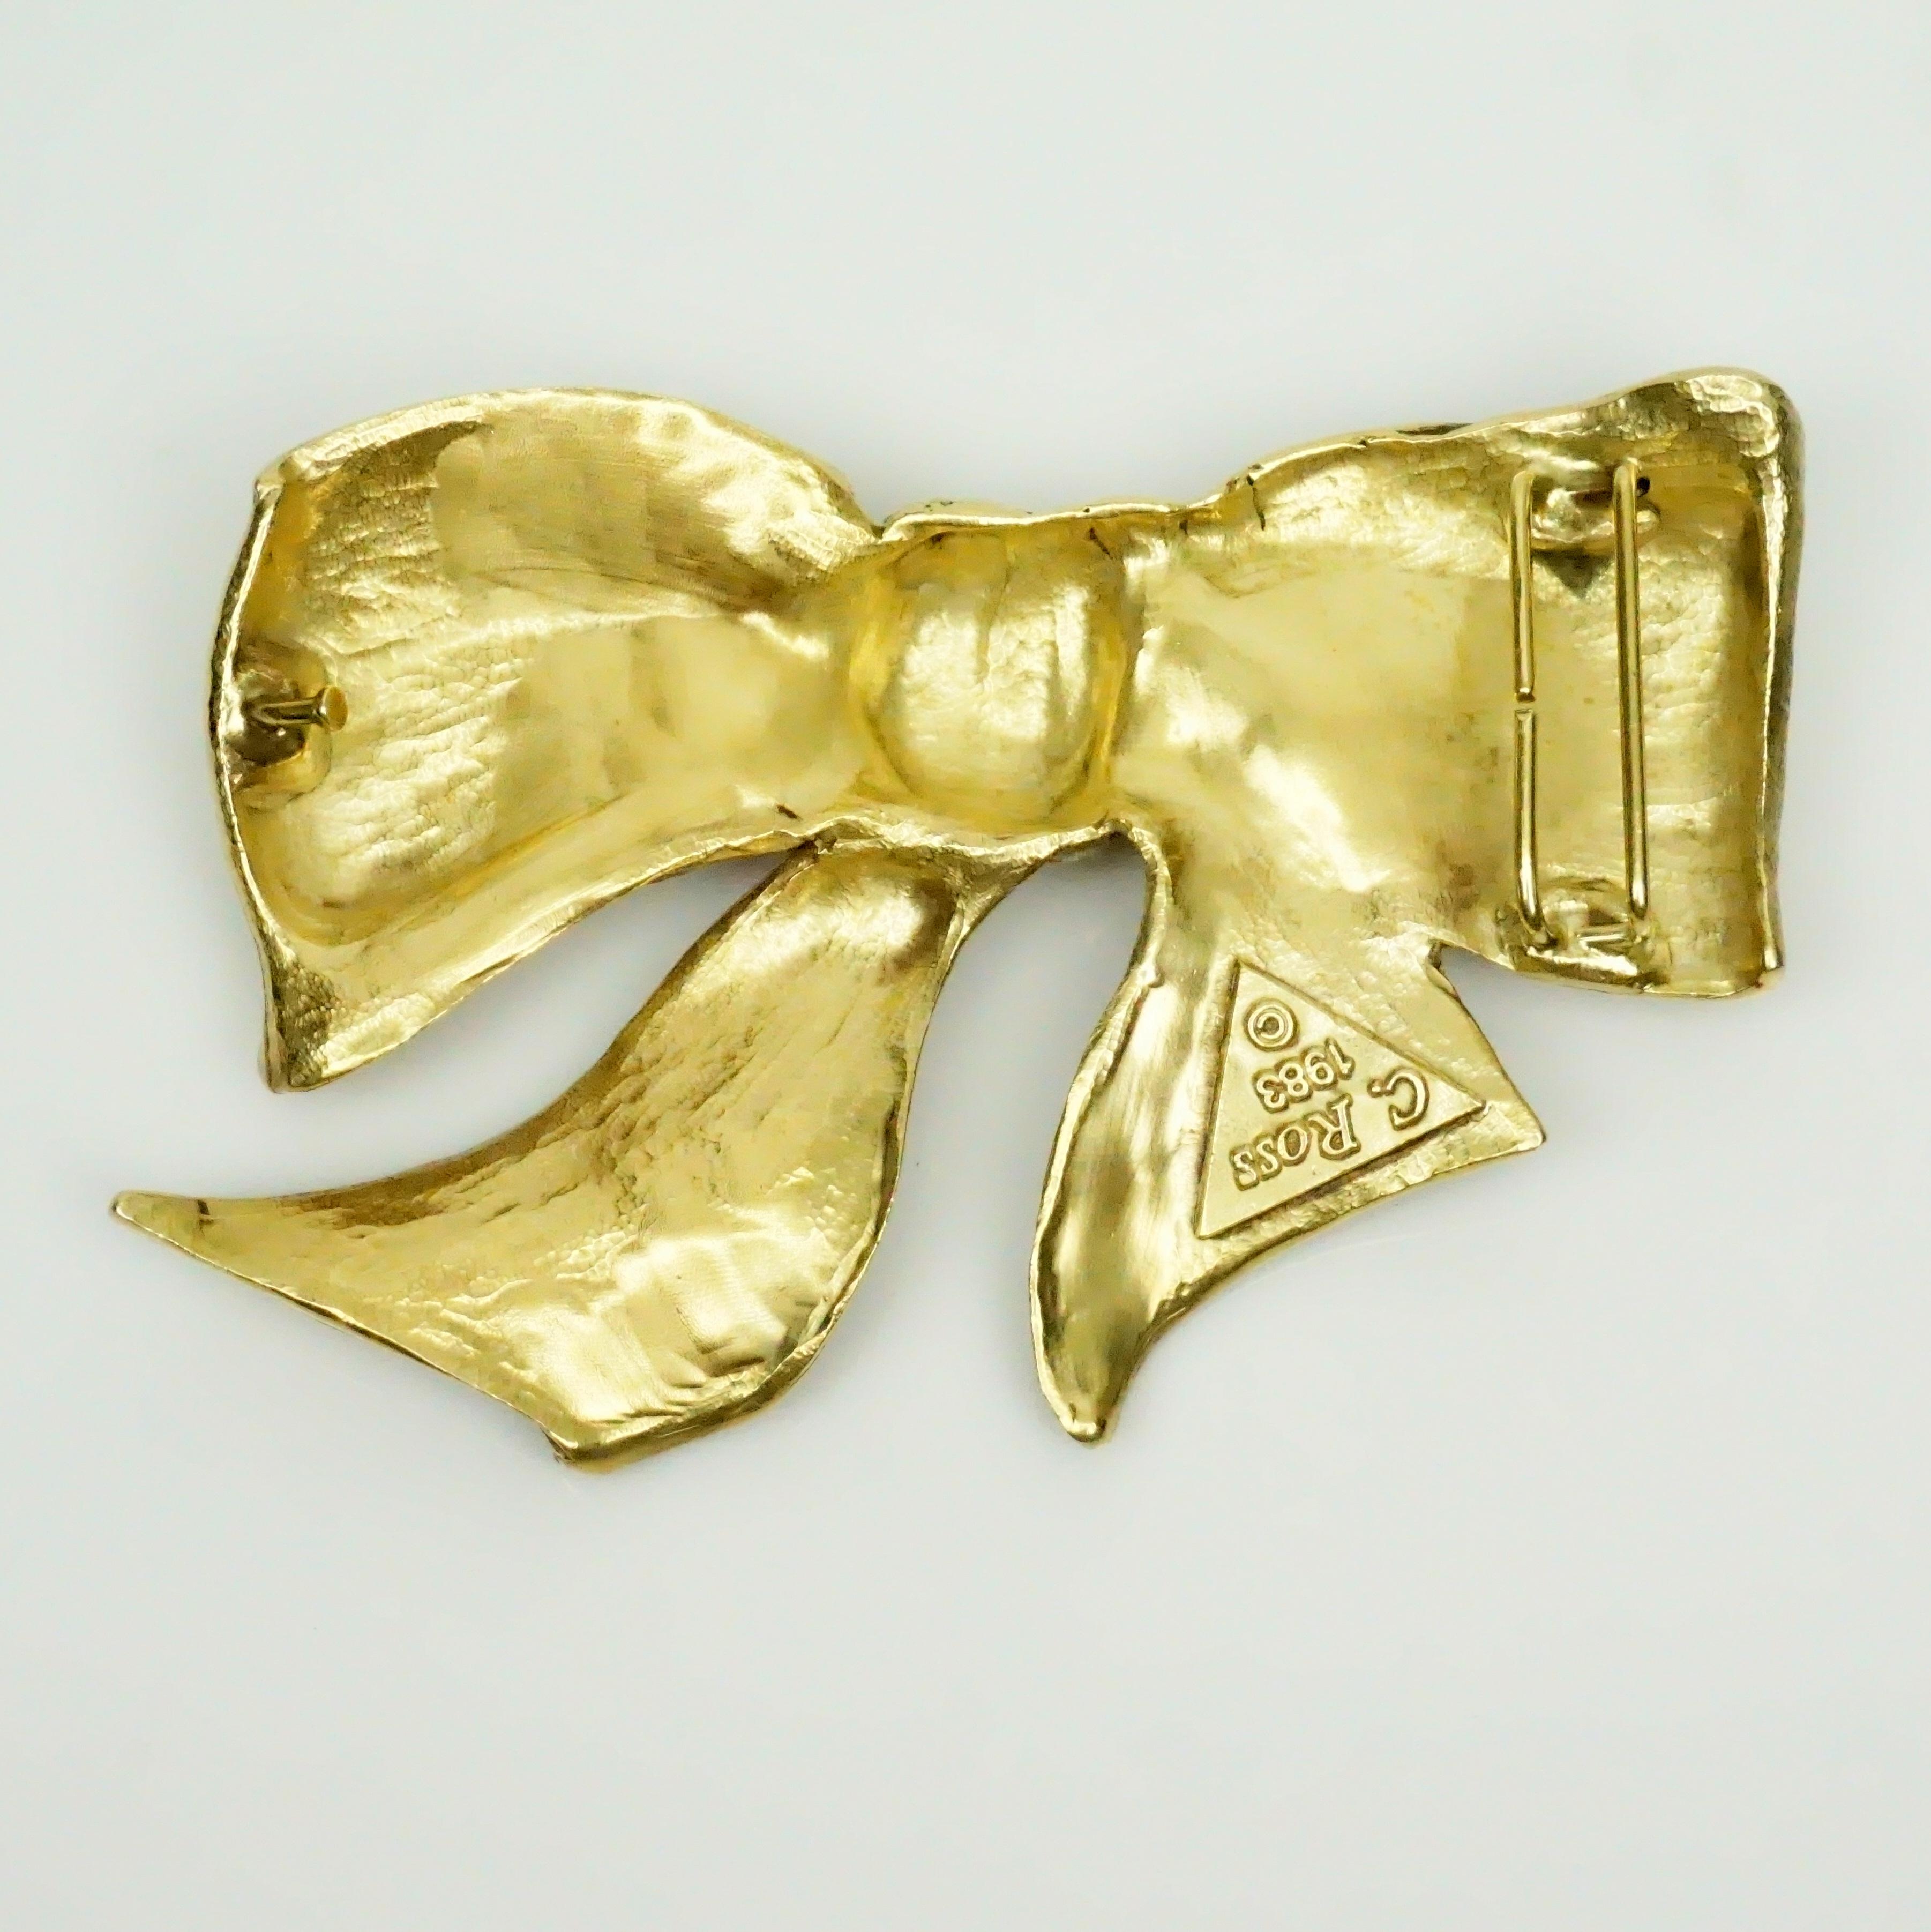 Christopher Ross Gold Bow Belt Buckle 1983. This vintage belt buckle is in great condition. It is a beautiful piece to dress up any outfit!
Measurements
Height: 4